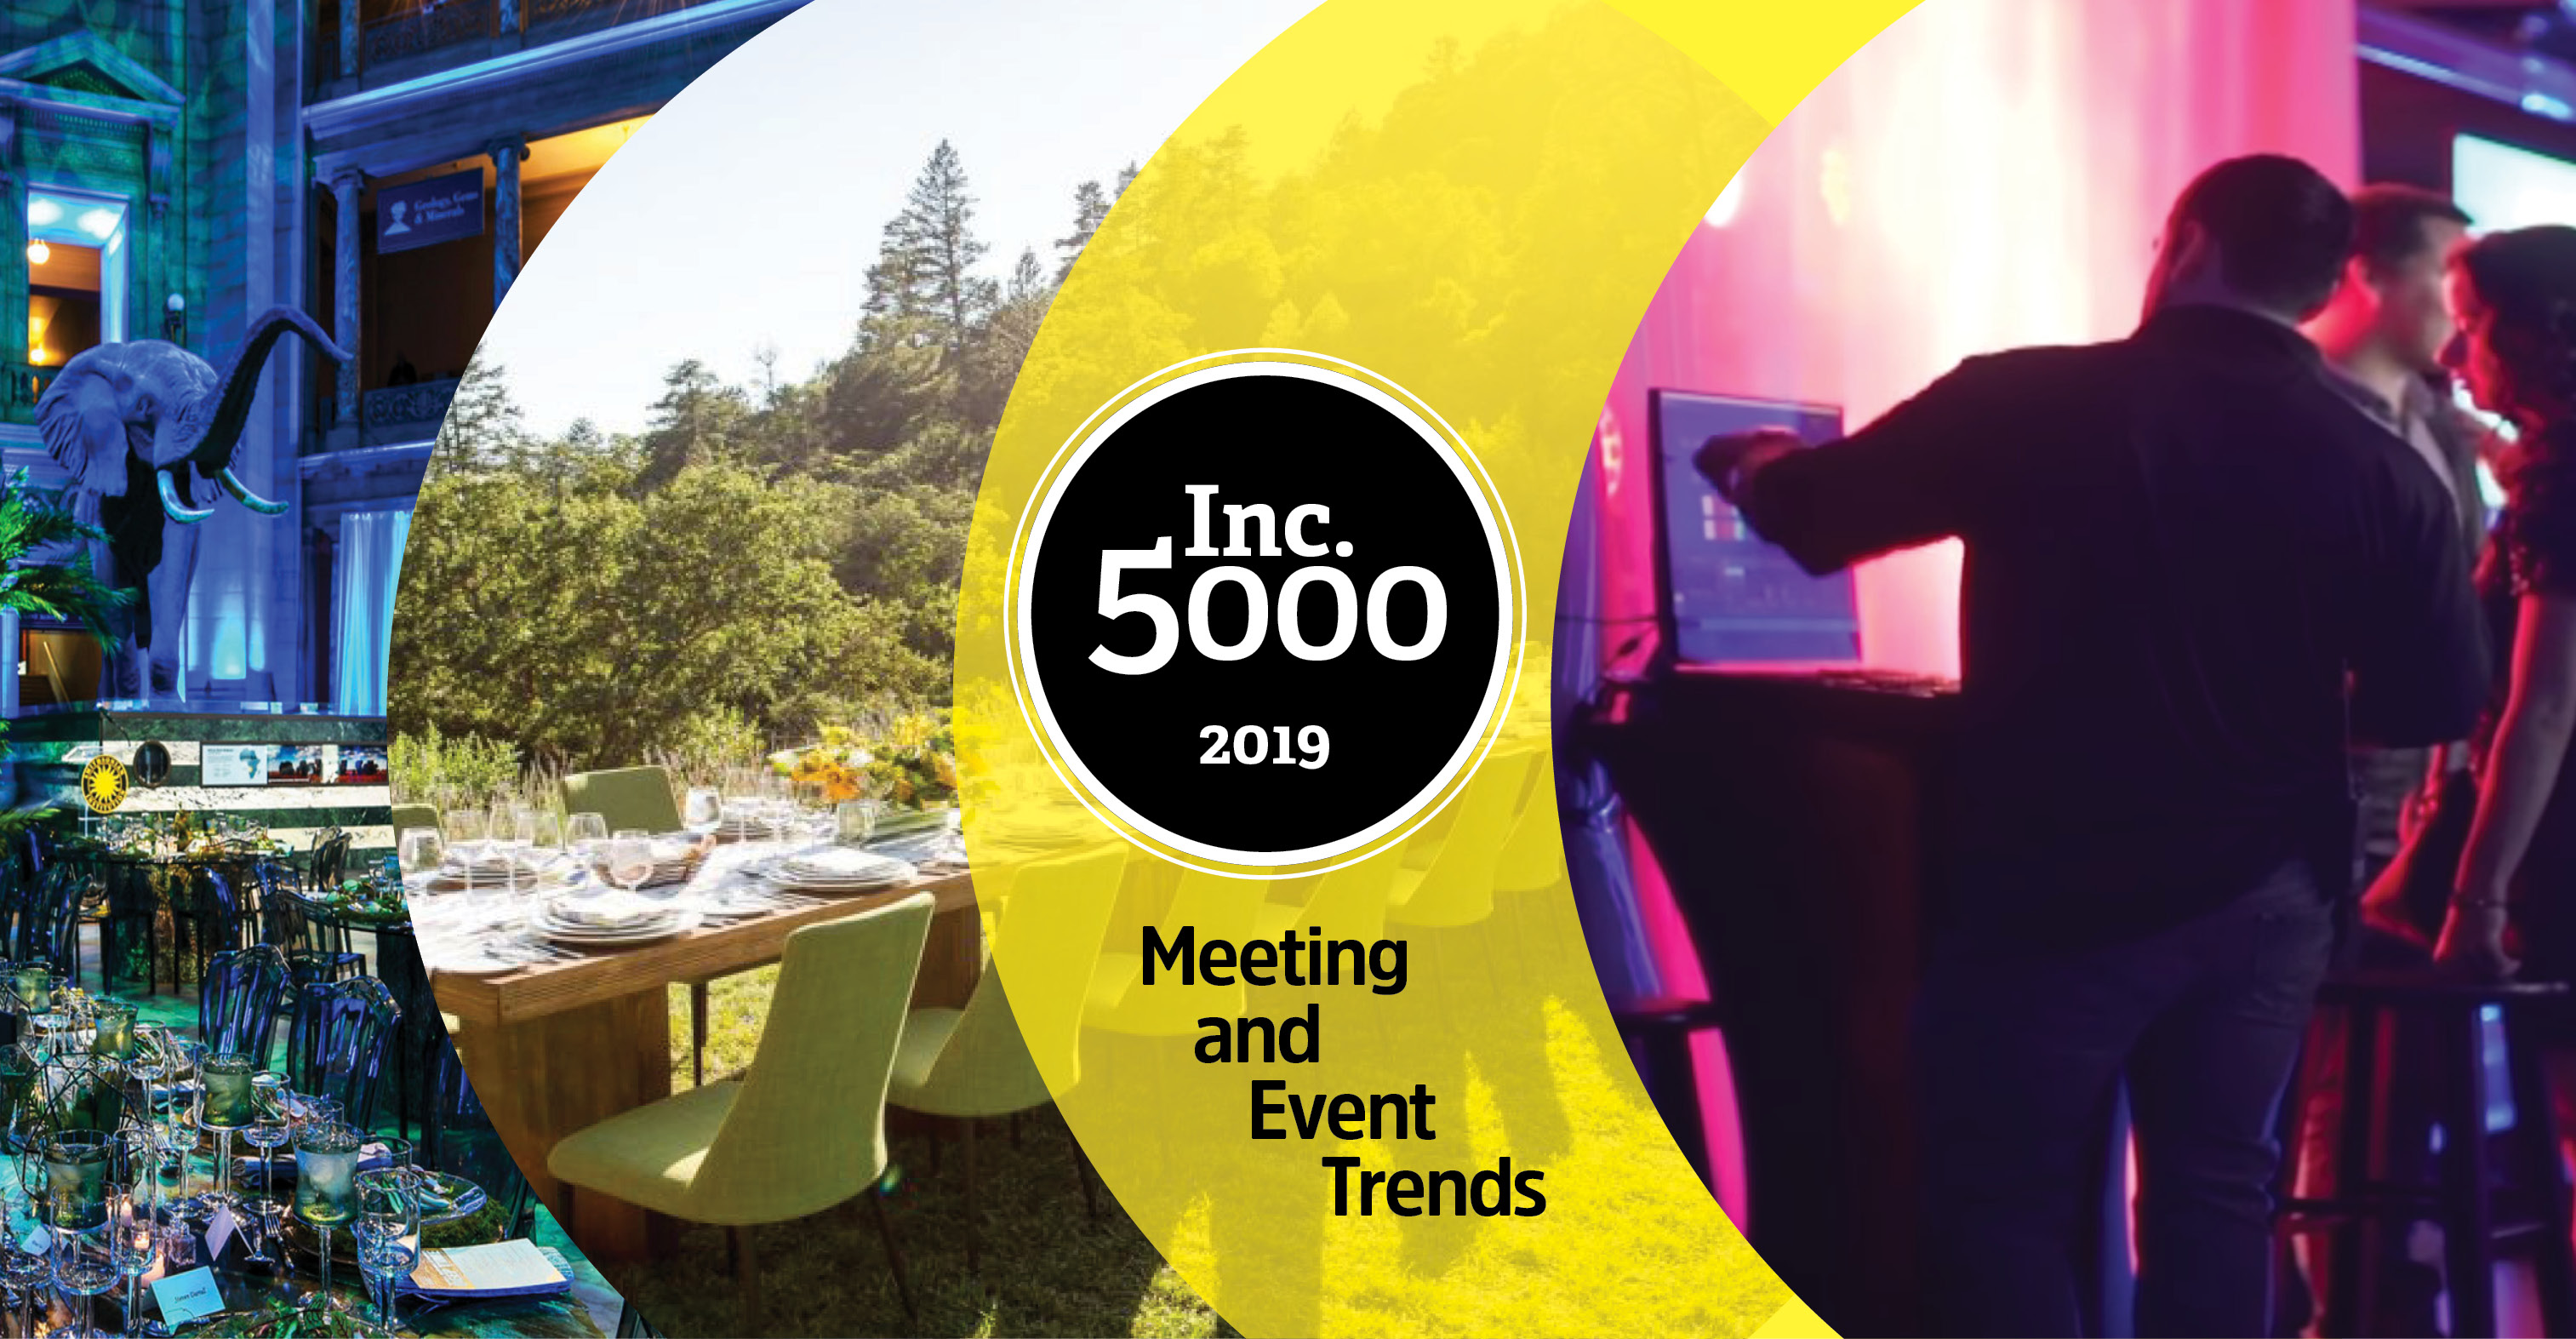 The Inc. 5000 List Gives Insight into Meeting and Event Trends